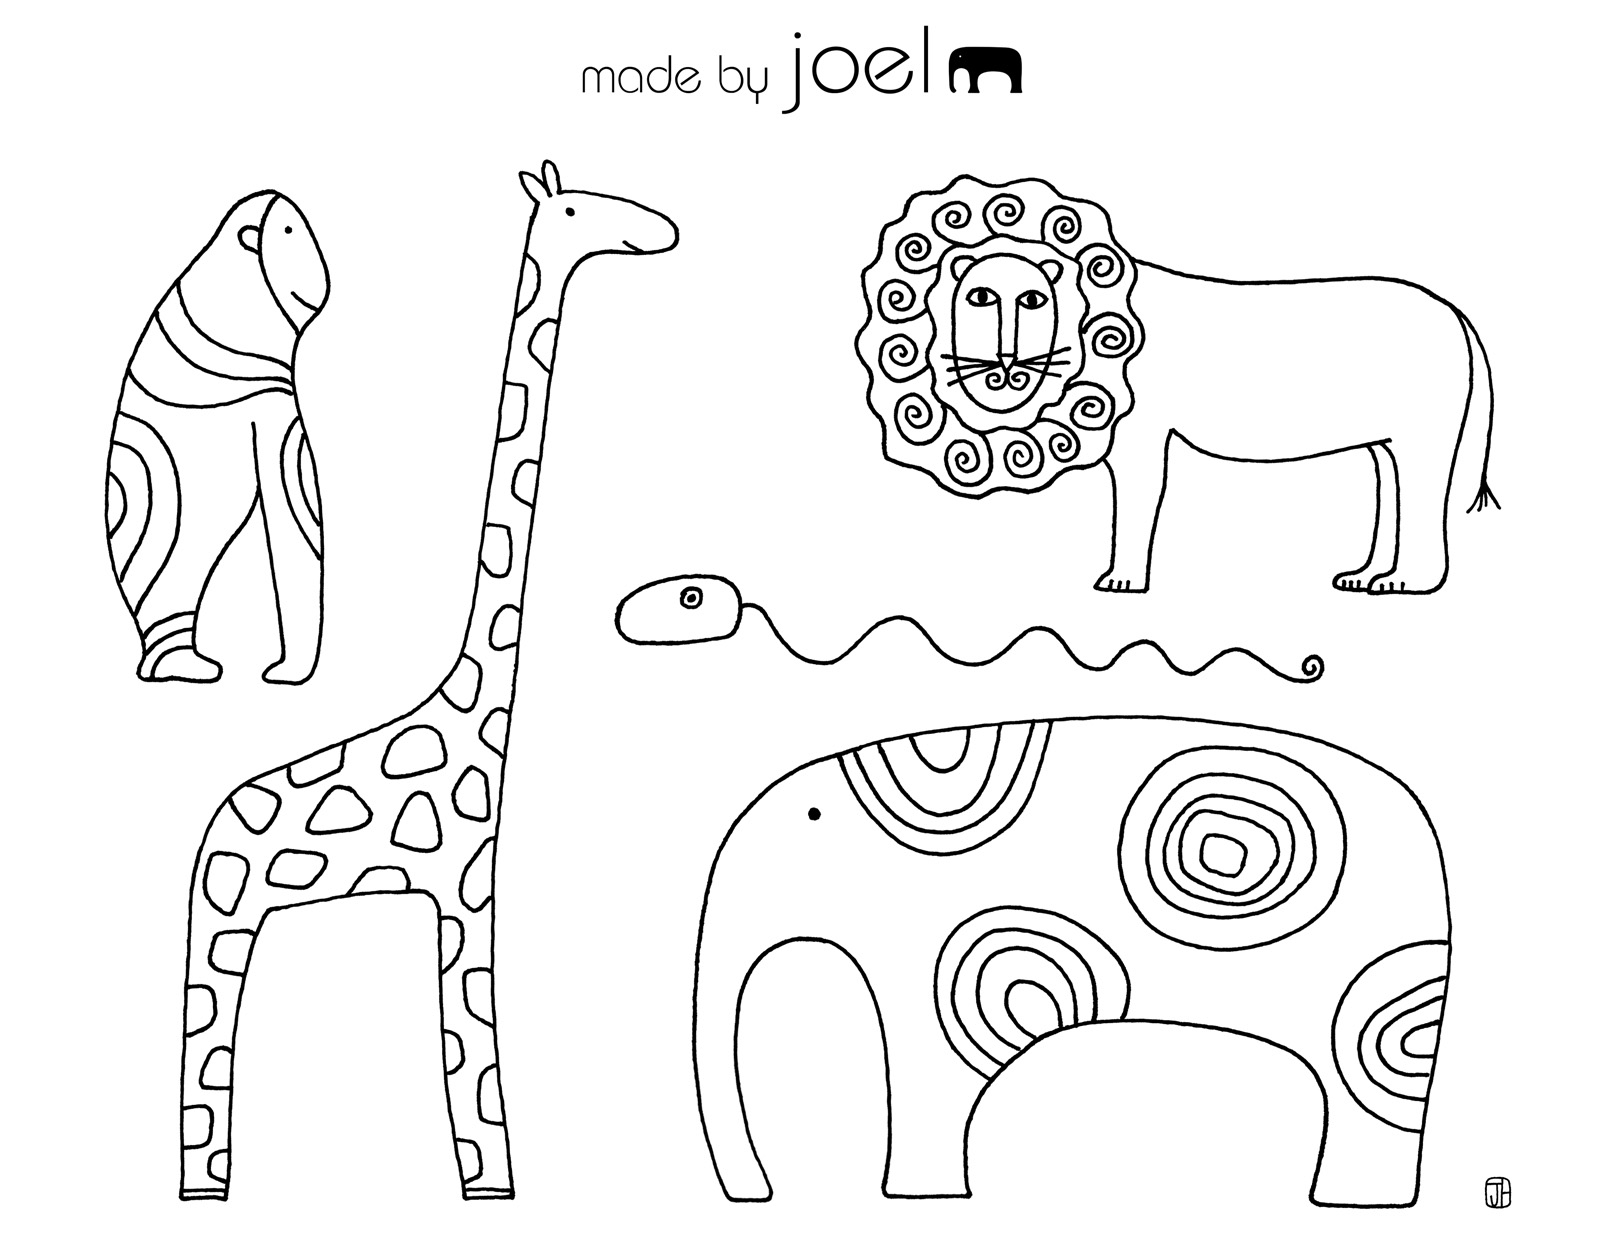 Free Coloring Sheets – Made by Joel